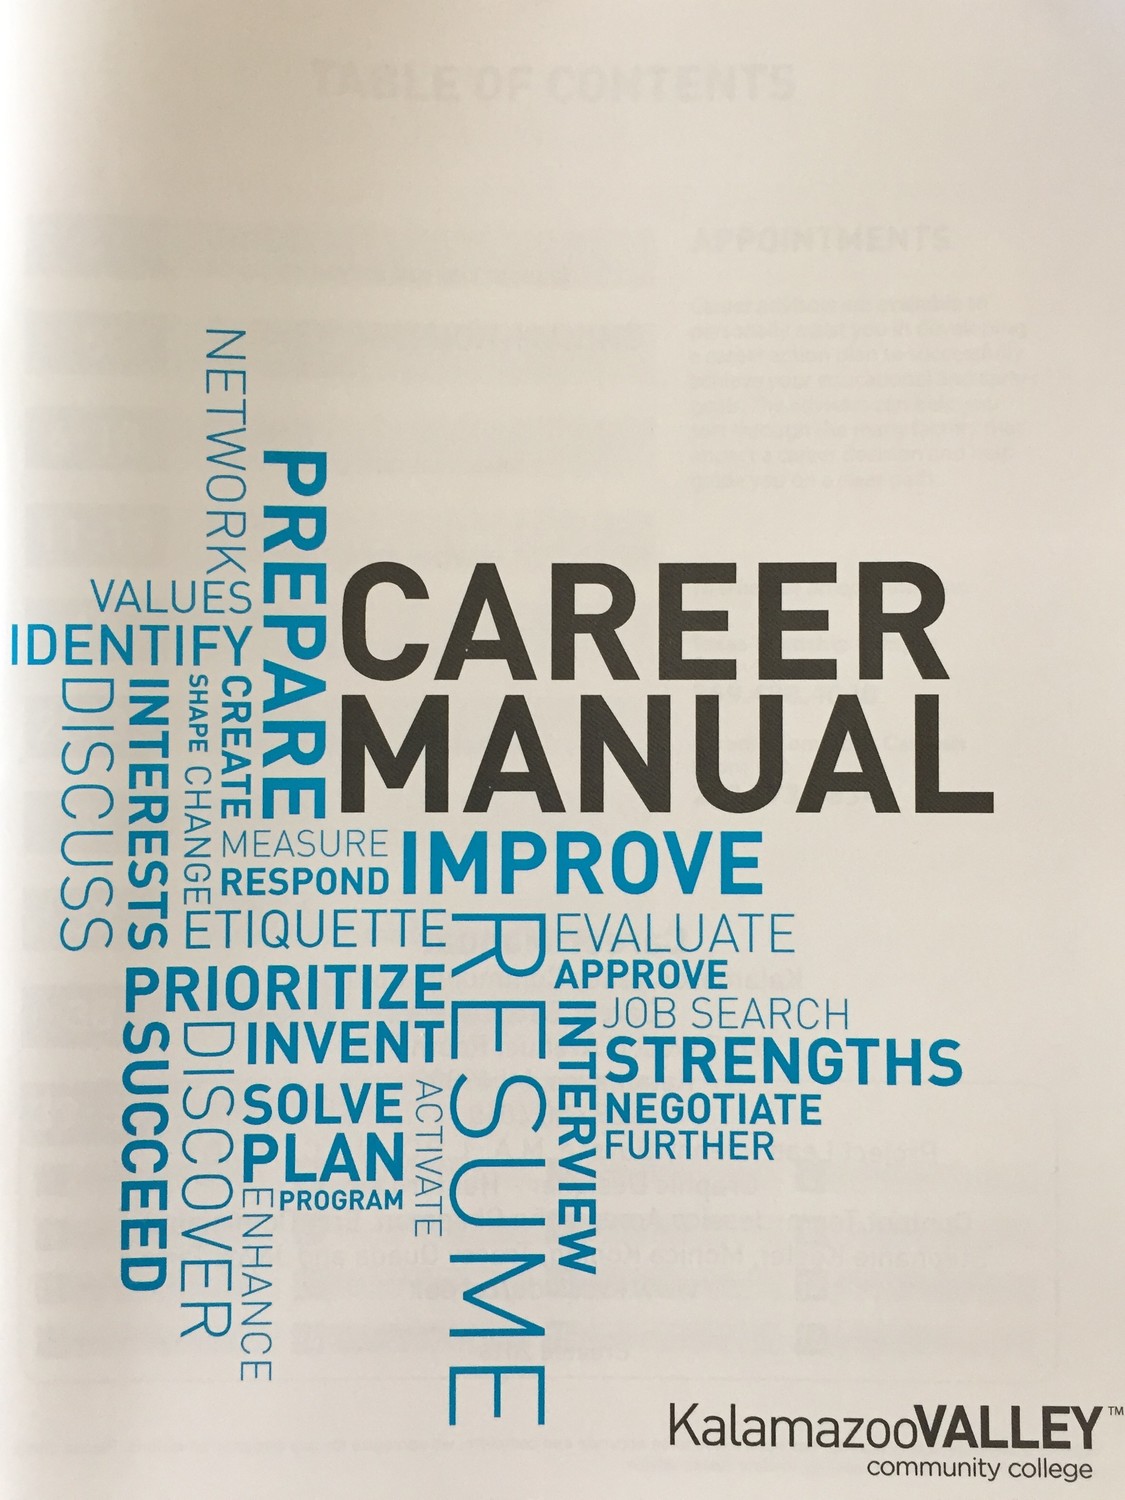 Gallery Photo of Author/Project Lead of "Career Manual" for Kalamazoo Valley Community College